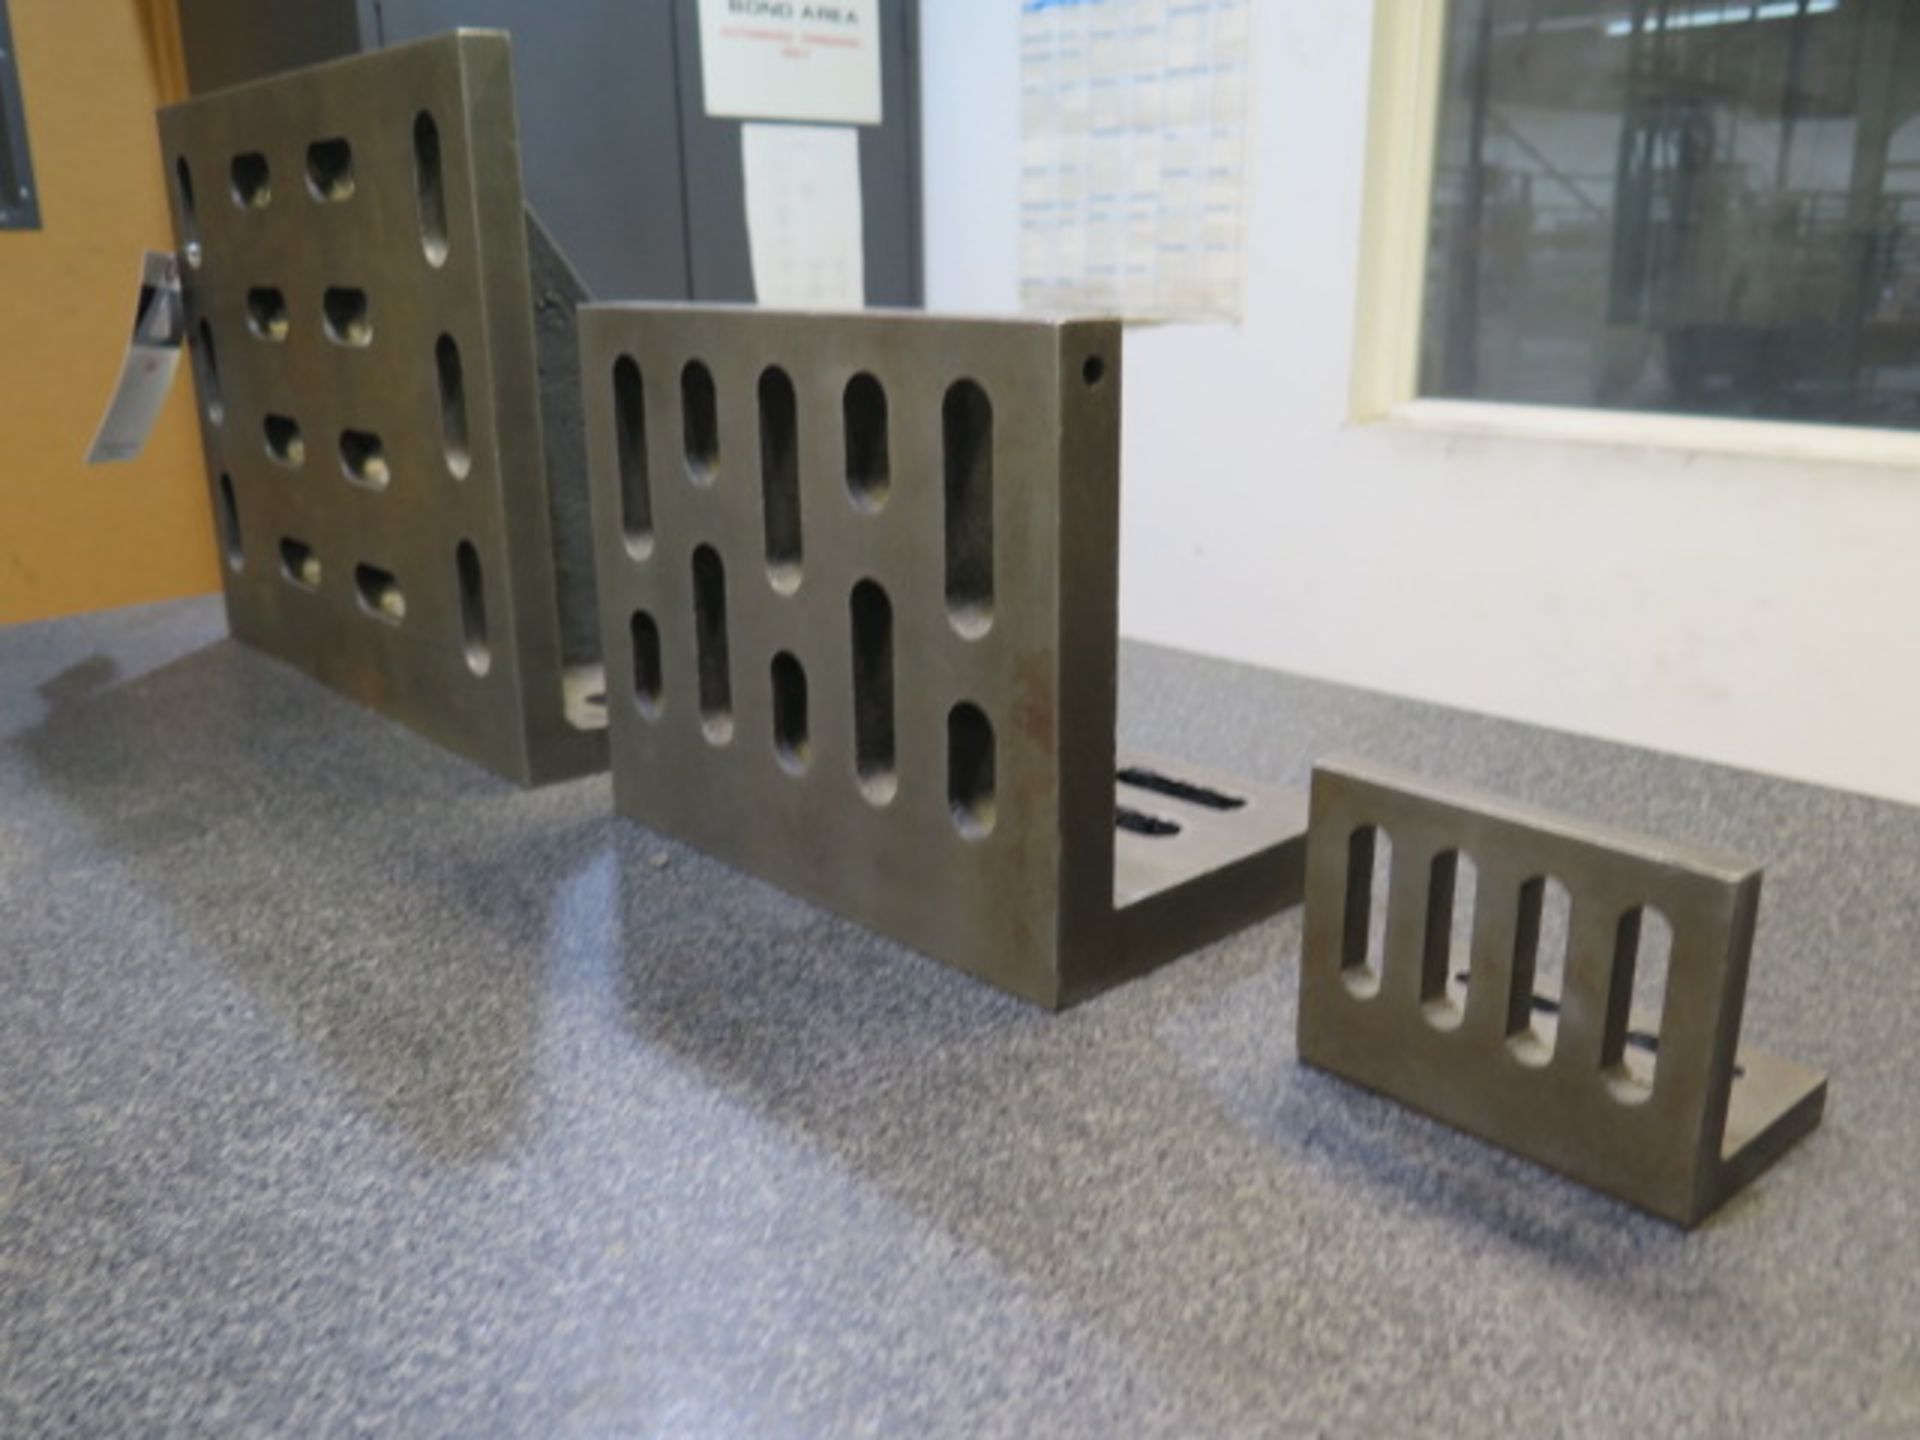 12" x 16" x 9", 8" x 10" x 6" and 3 1/2" x 4 1/2" x 3" Angle Plates (3) (SOLD AS-IS - NO WARRANTY) - Image 2 of 4